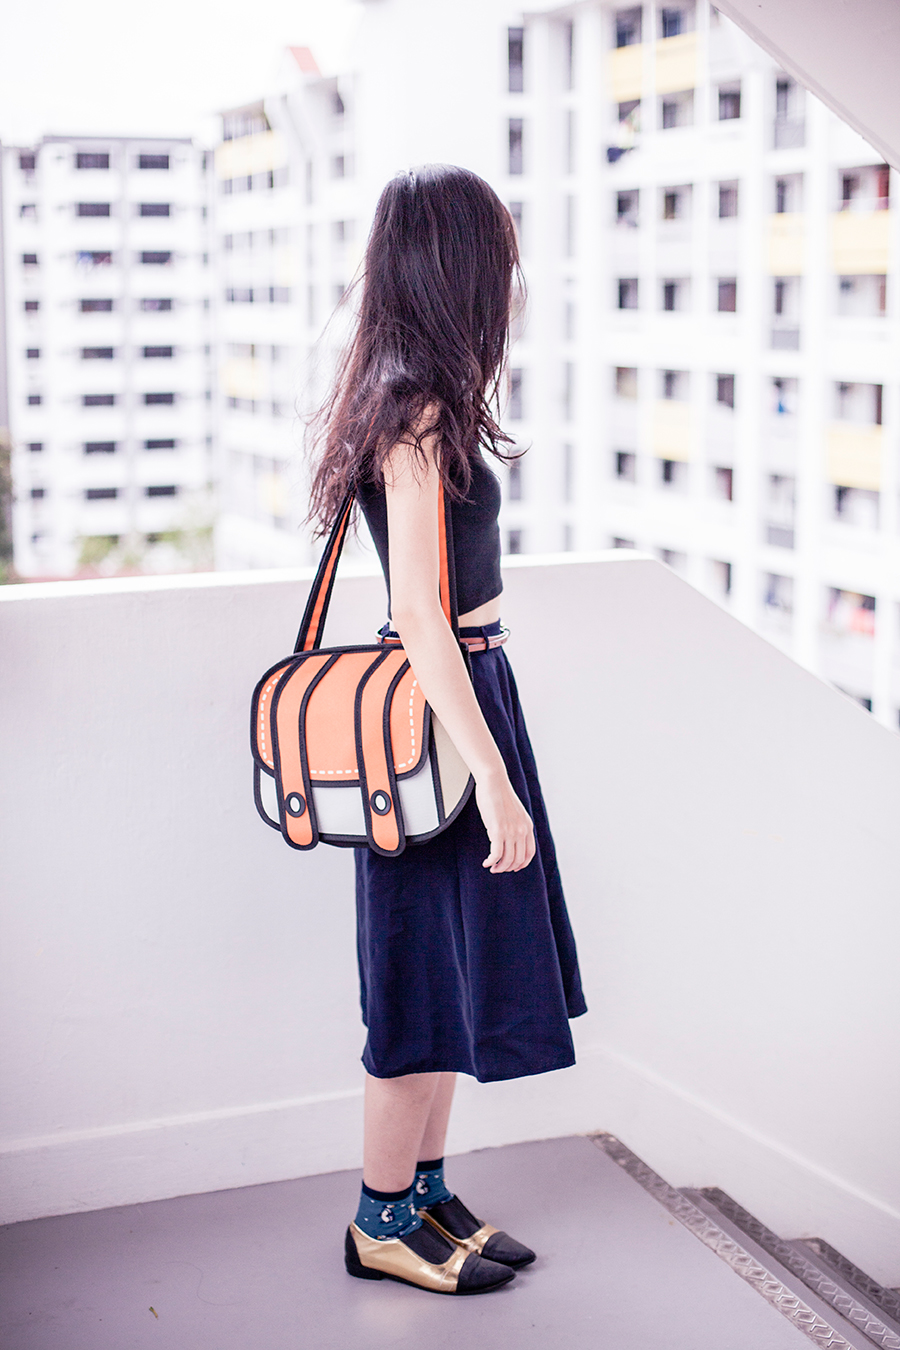 2D satchel bag from Taobao, black & gold pointed flats from Something Borrowed via Zalora.